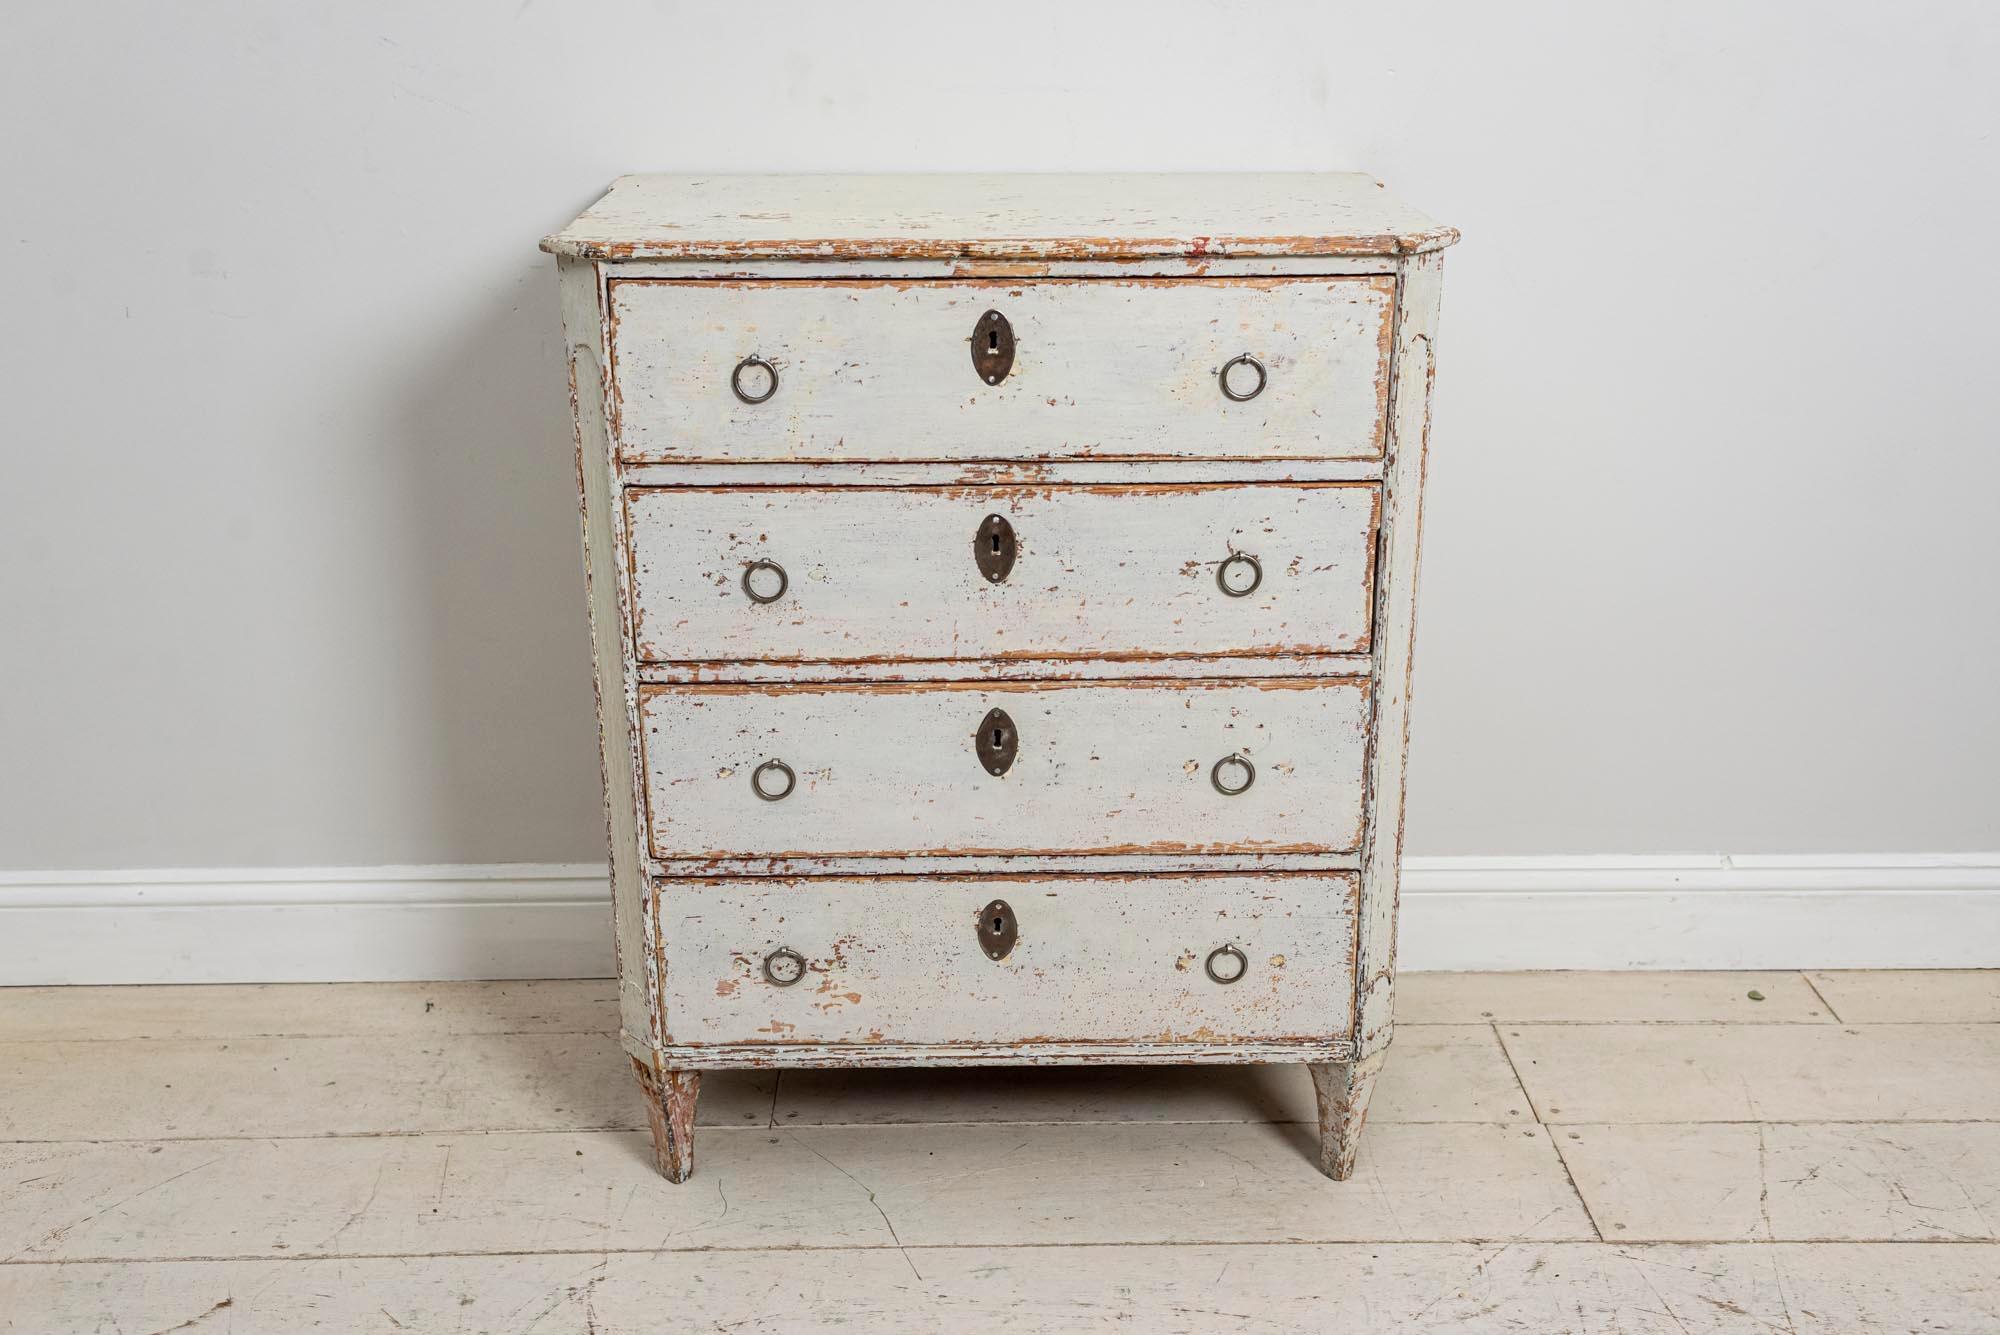 An interesting 18th century compact four-drawer commode. The top drawer contains a feature fall front pull-out writing desk or bureau. It’s interior has a lovely well-worn appearance with useful small storage drawers and shelf. A perfect place to